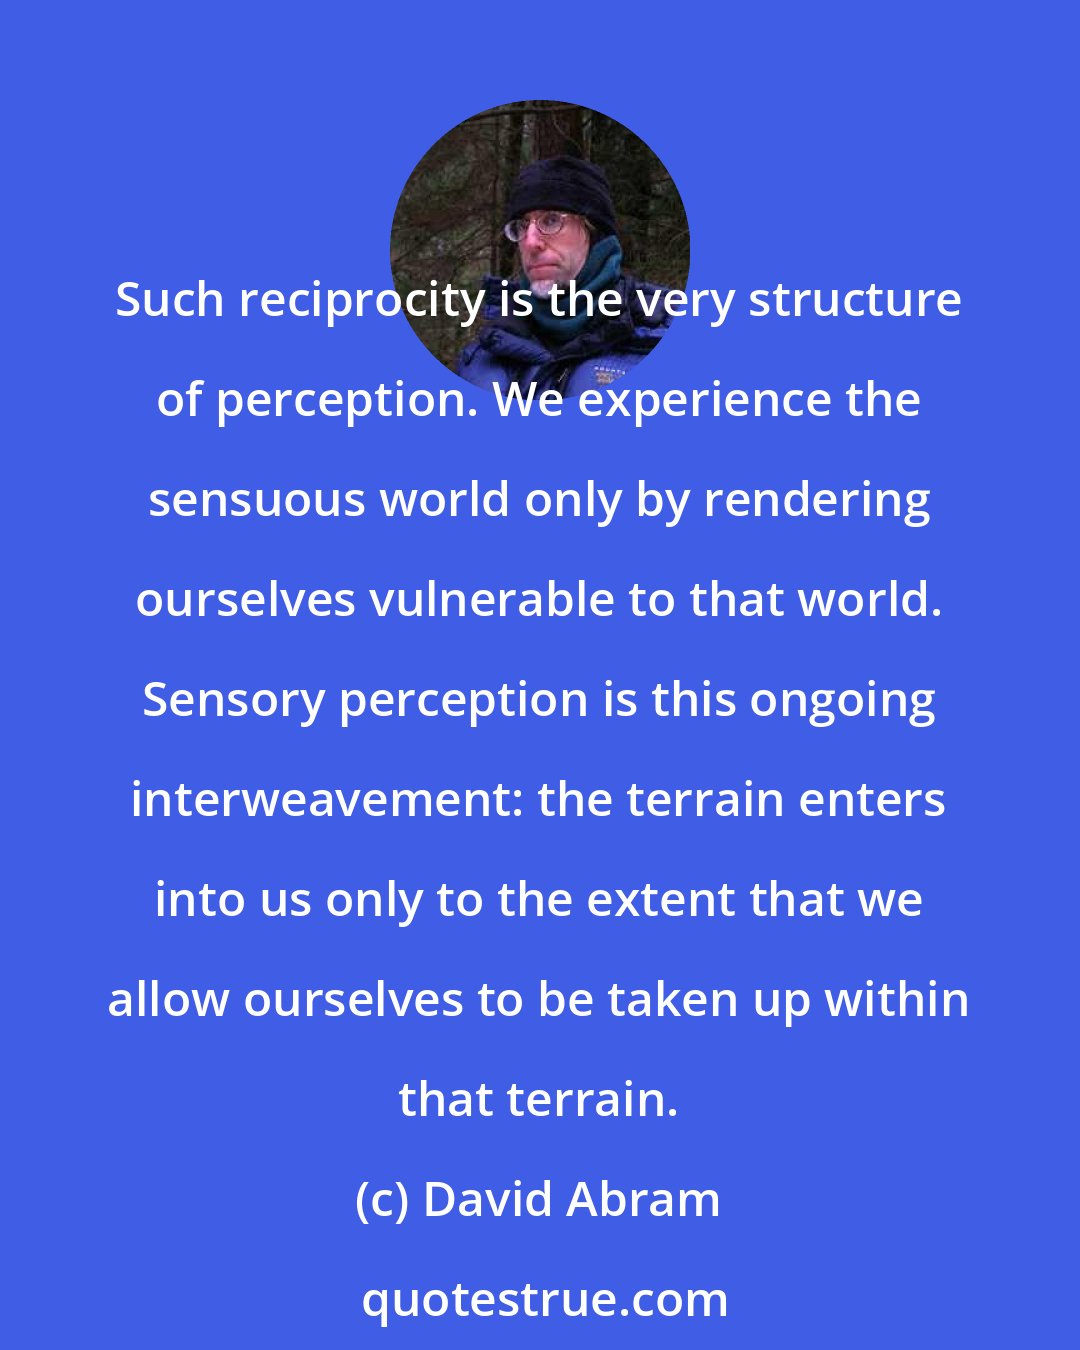 David Abram: Such reciprocity is the very structure of perception. We experience the sensuous world only by rendering ourselves vulnerable to that world. Sensory perception is this ongoing interweavement: the terrain enters into us only to the extent that we allow ourselves to be taken up within that terrain.